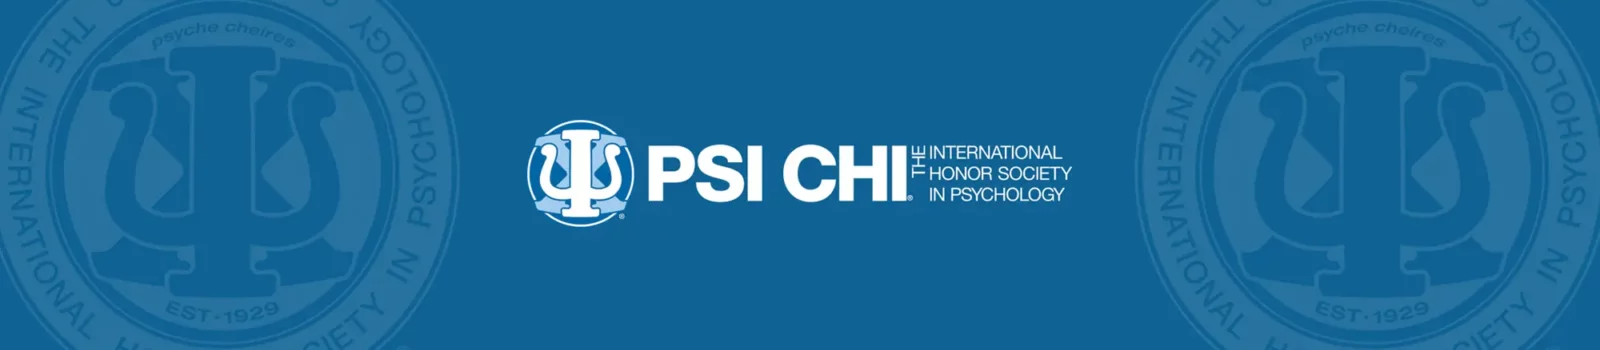 Psi Chi Logo with their motto, The International Honor Society In Psychology